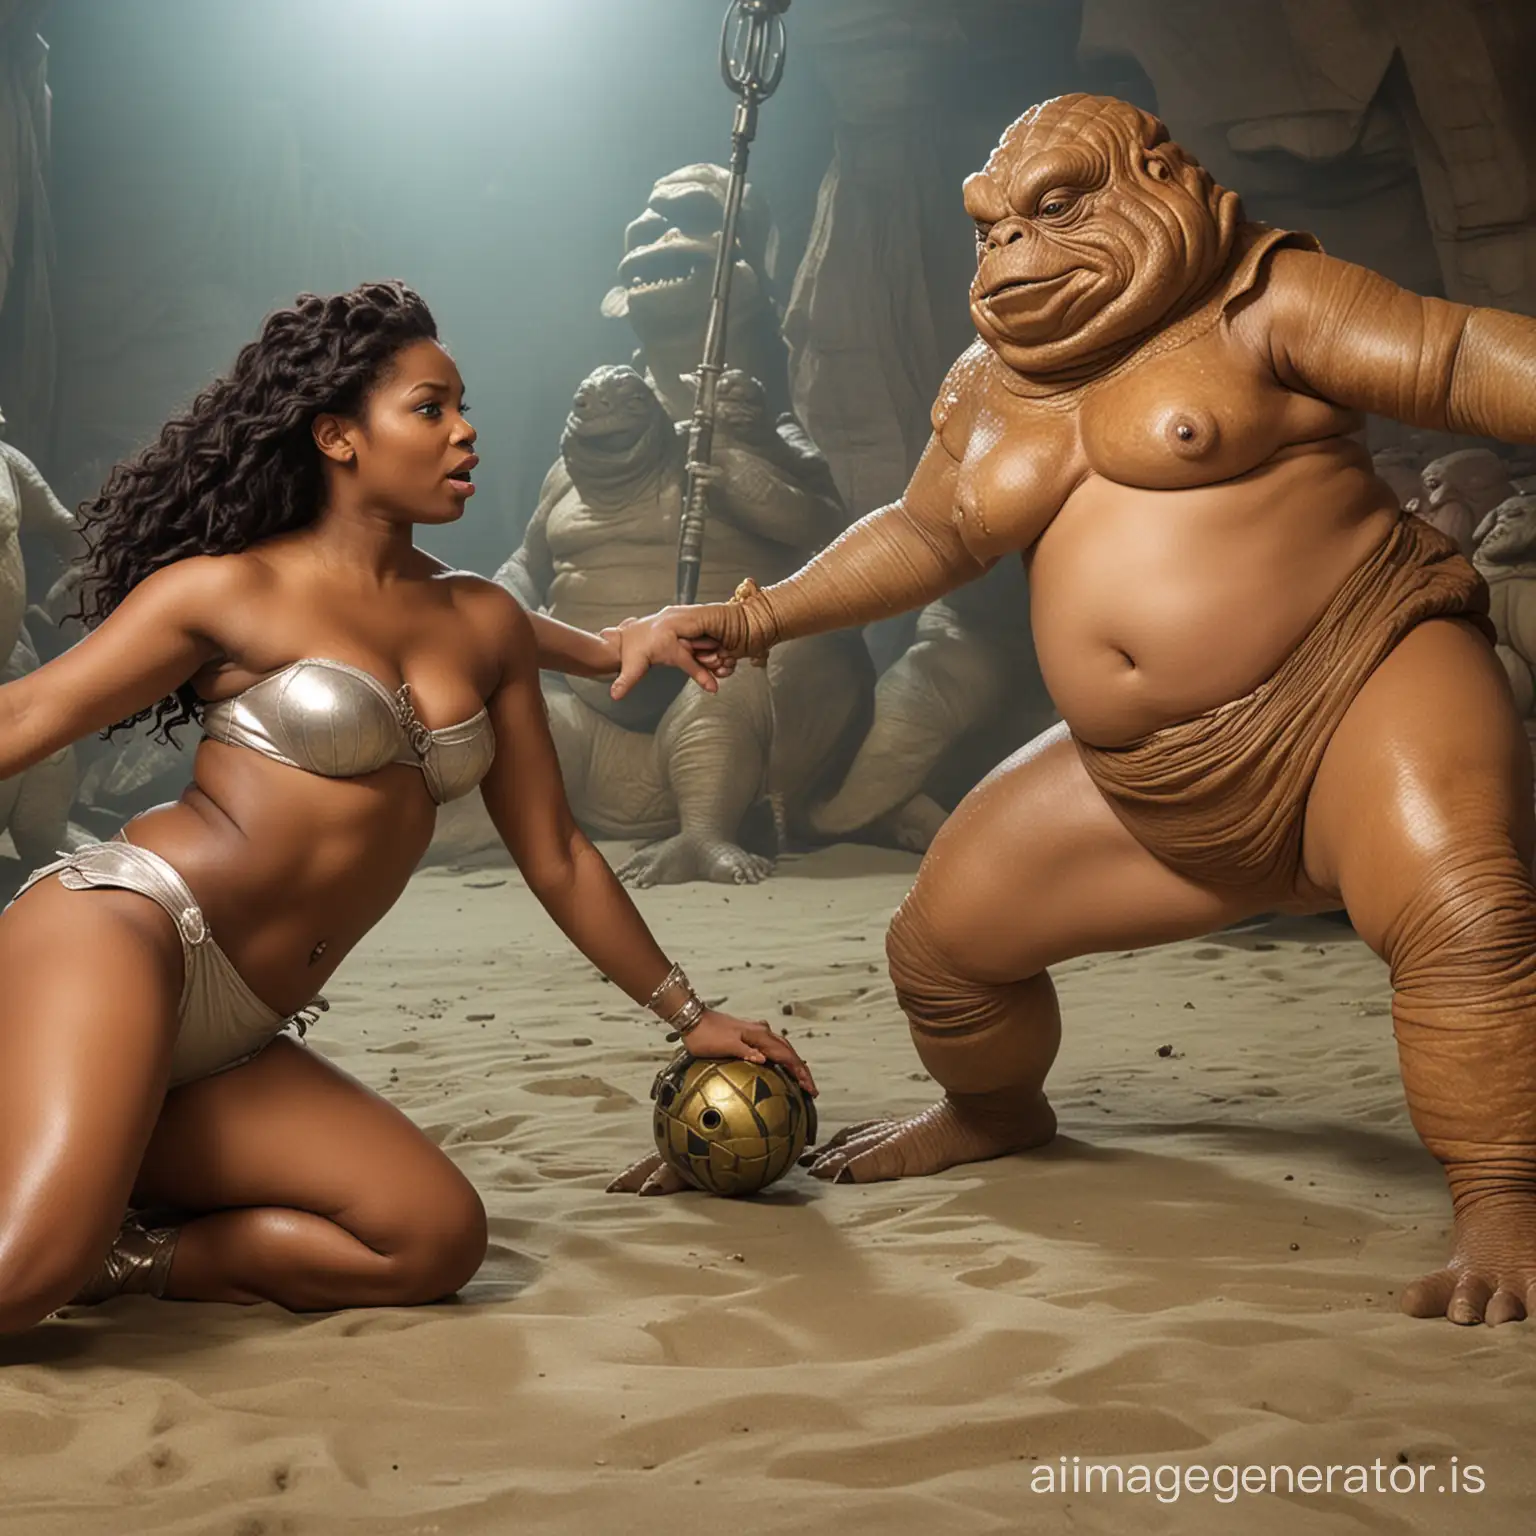 ebony Mermaid Princess wrestle each other in front of their Master Jabba the Hutt